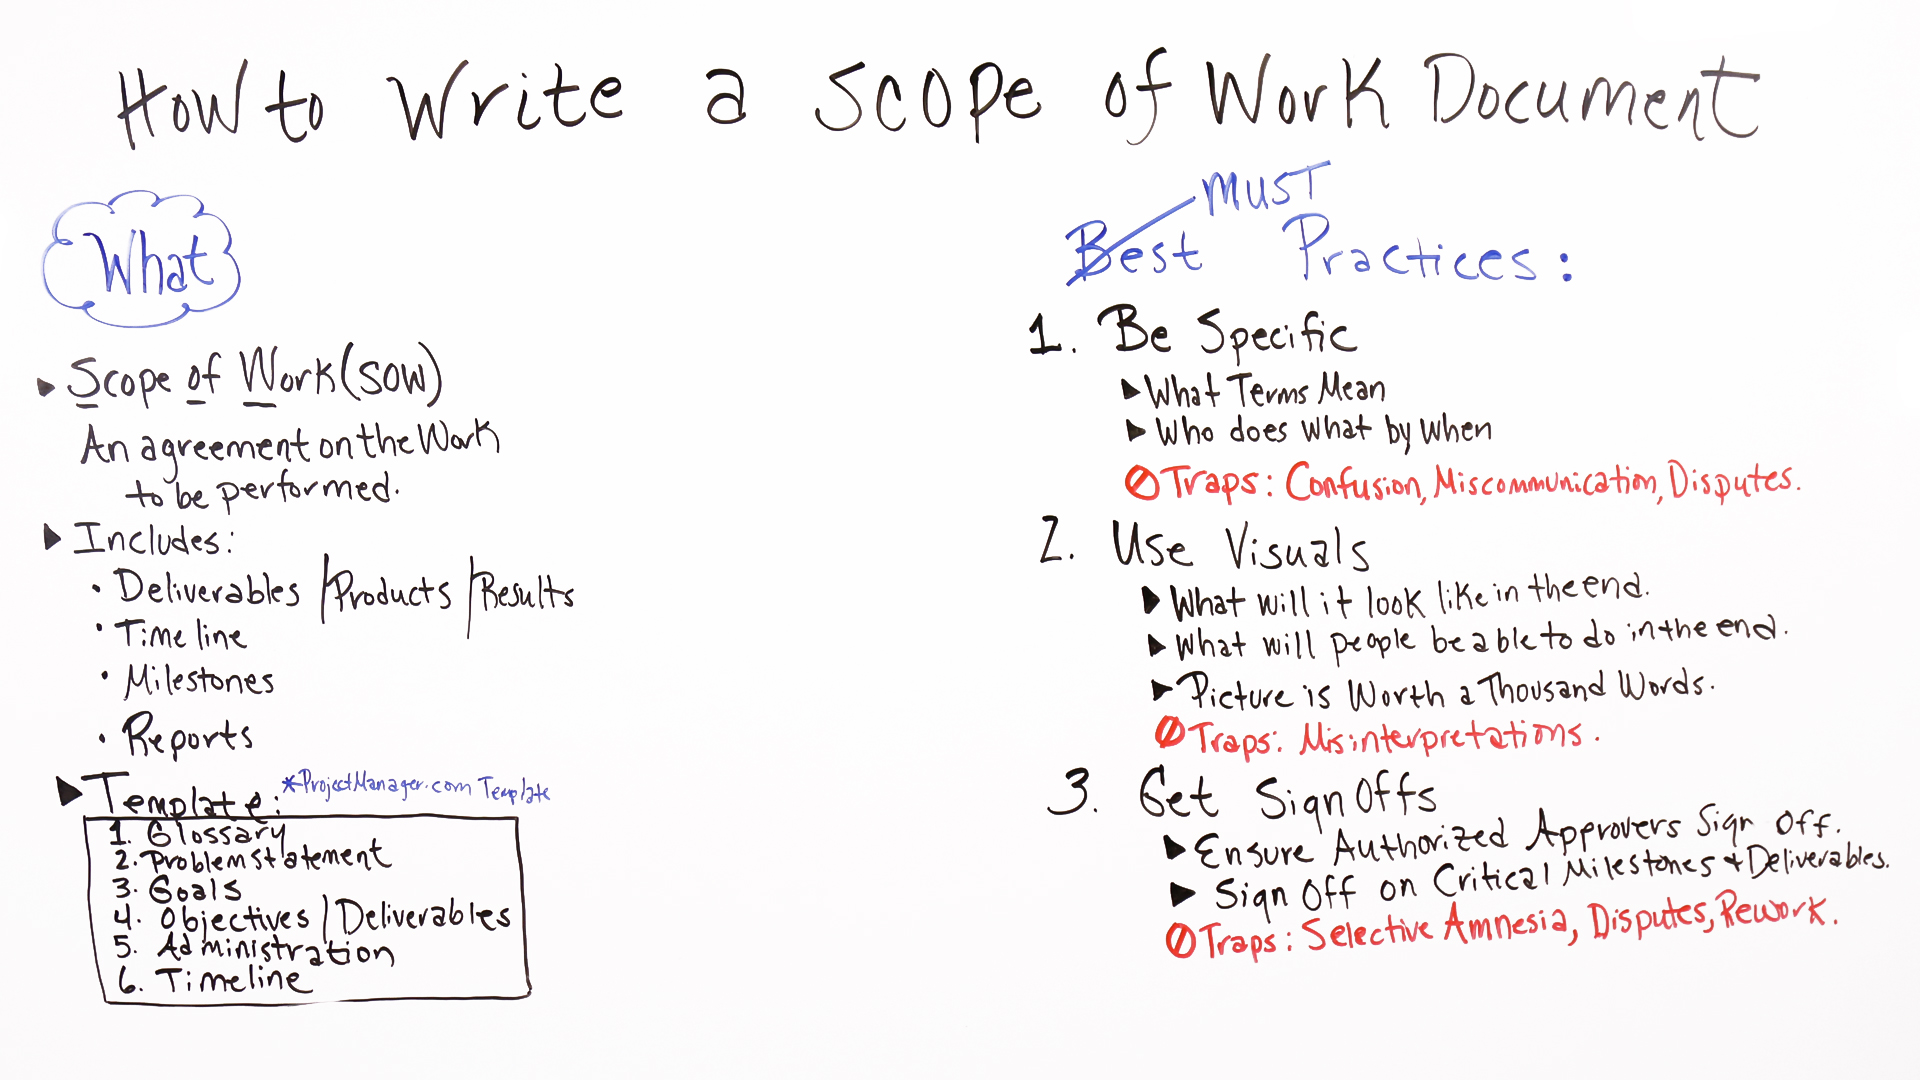 Snapshot of the whiteboard for the How to Write a Scope of Work Video